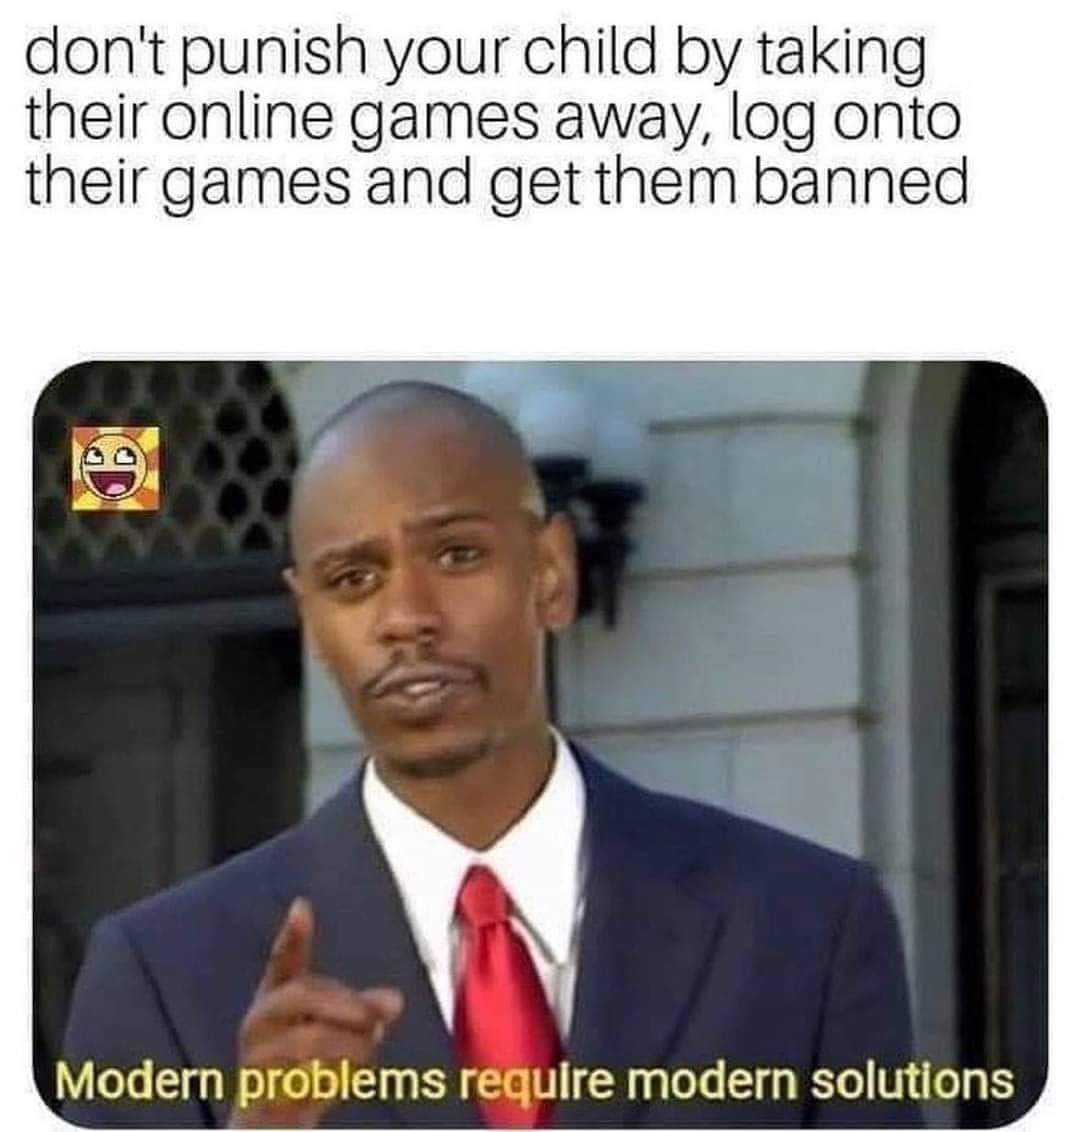 april fool memes - don't punish your child by taking their online games away, log onto their games and get them banned Modern problems require modern solutions